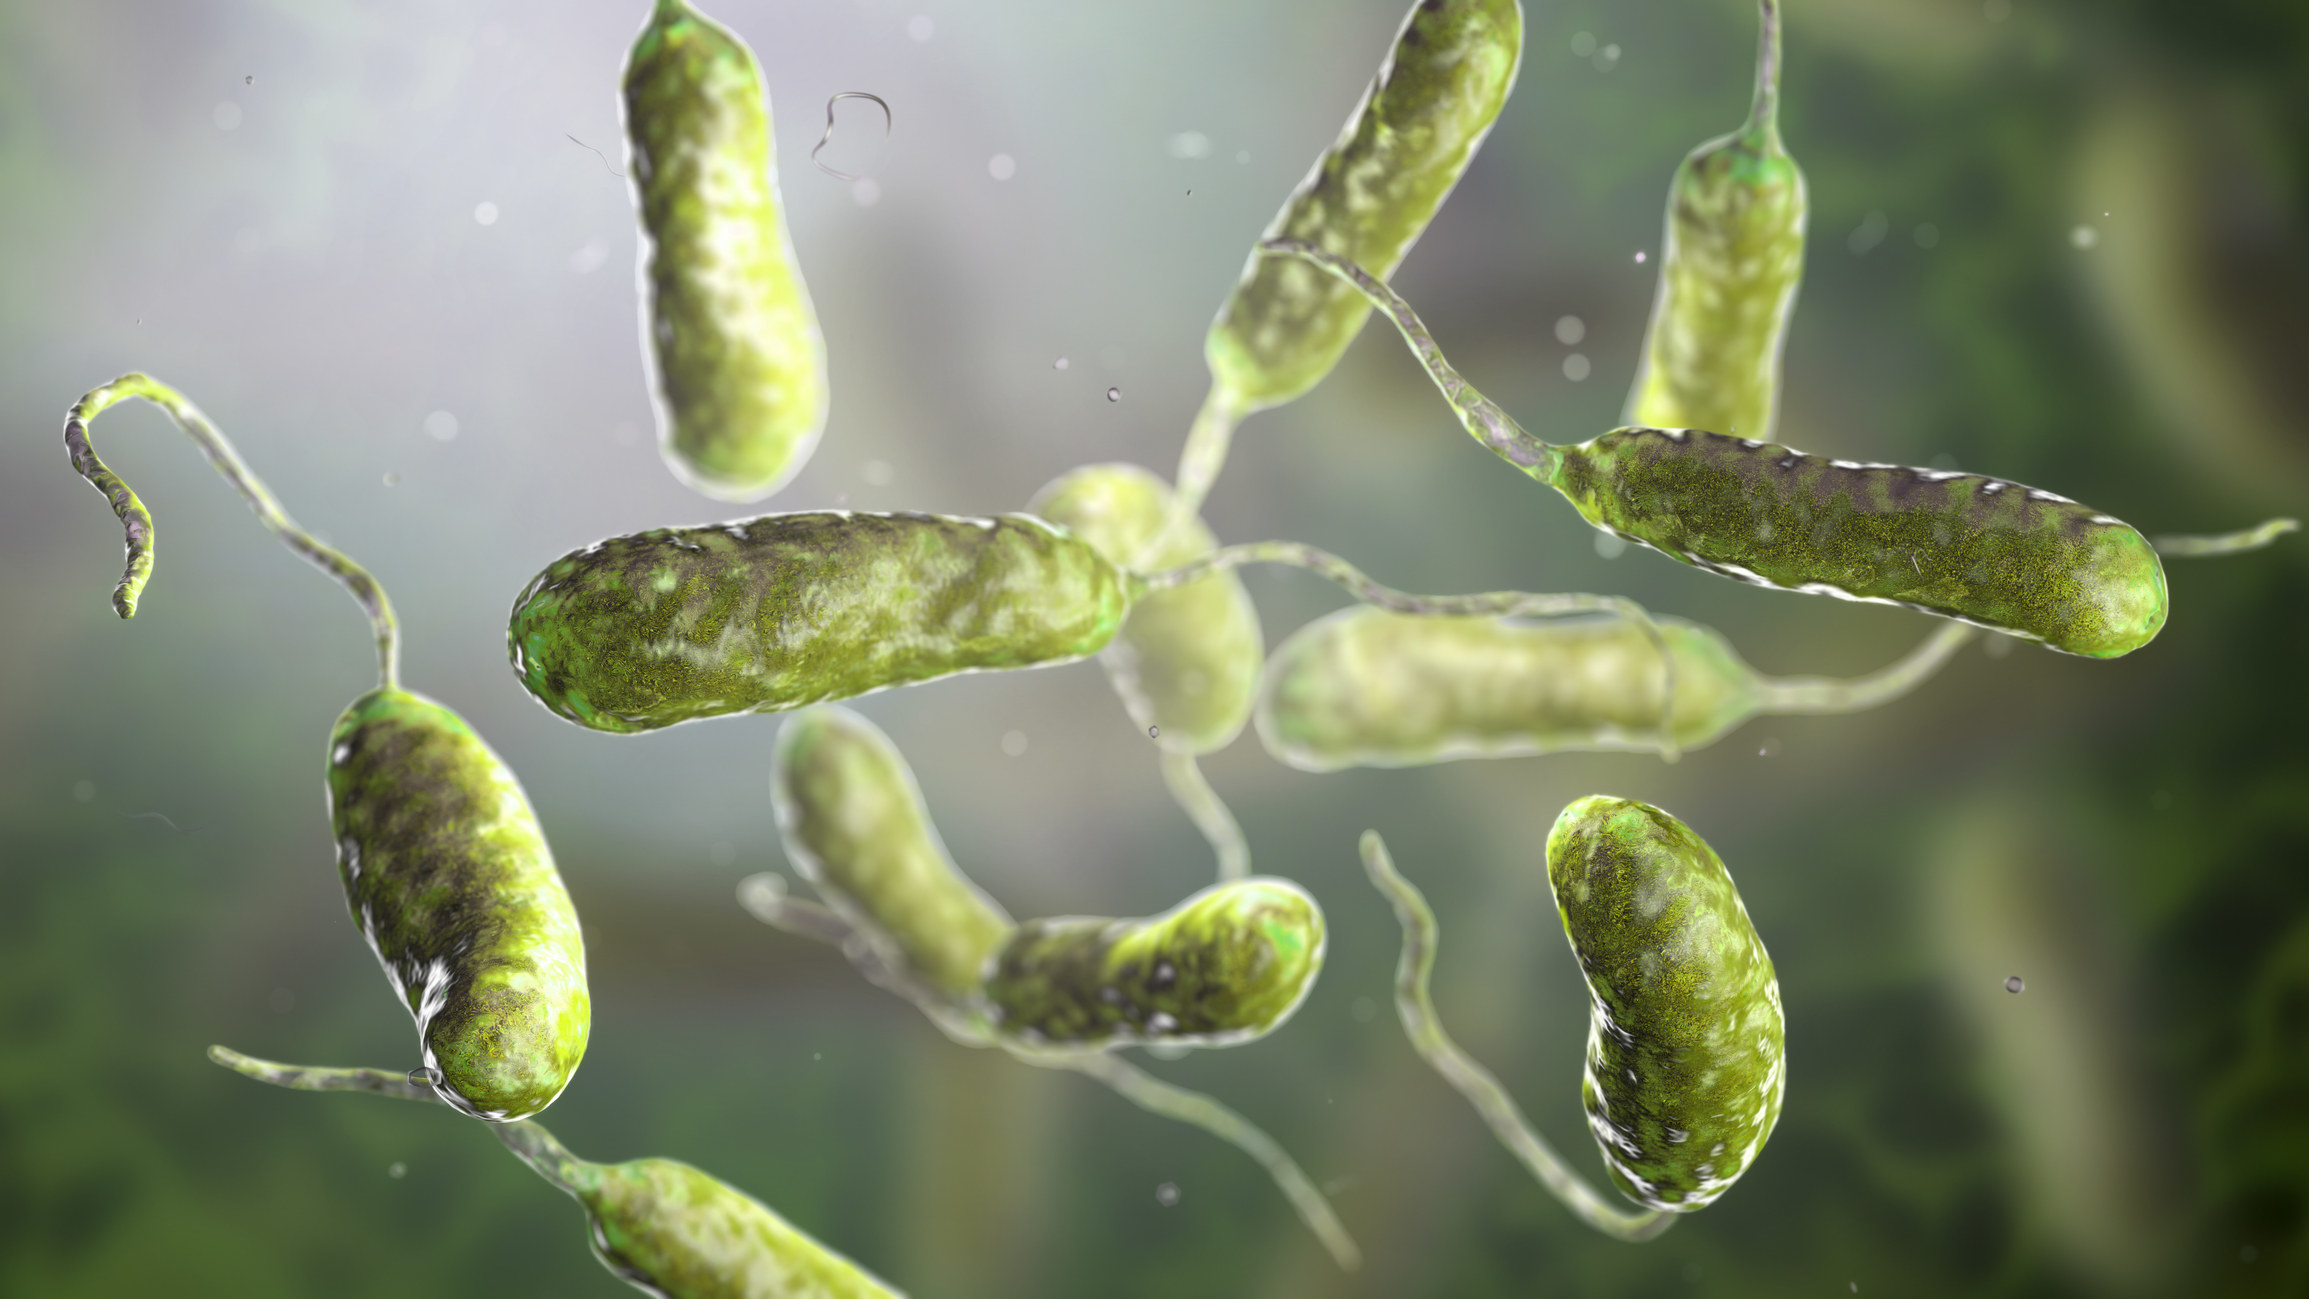 A 3D rendering of the bacteria